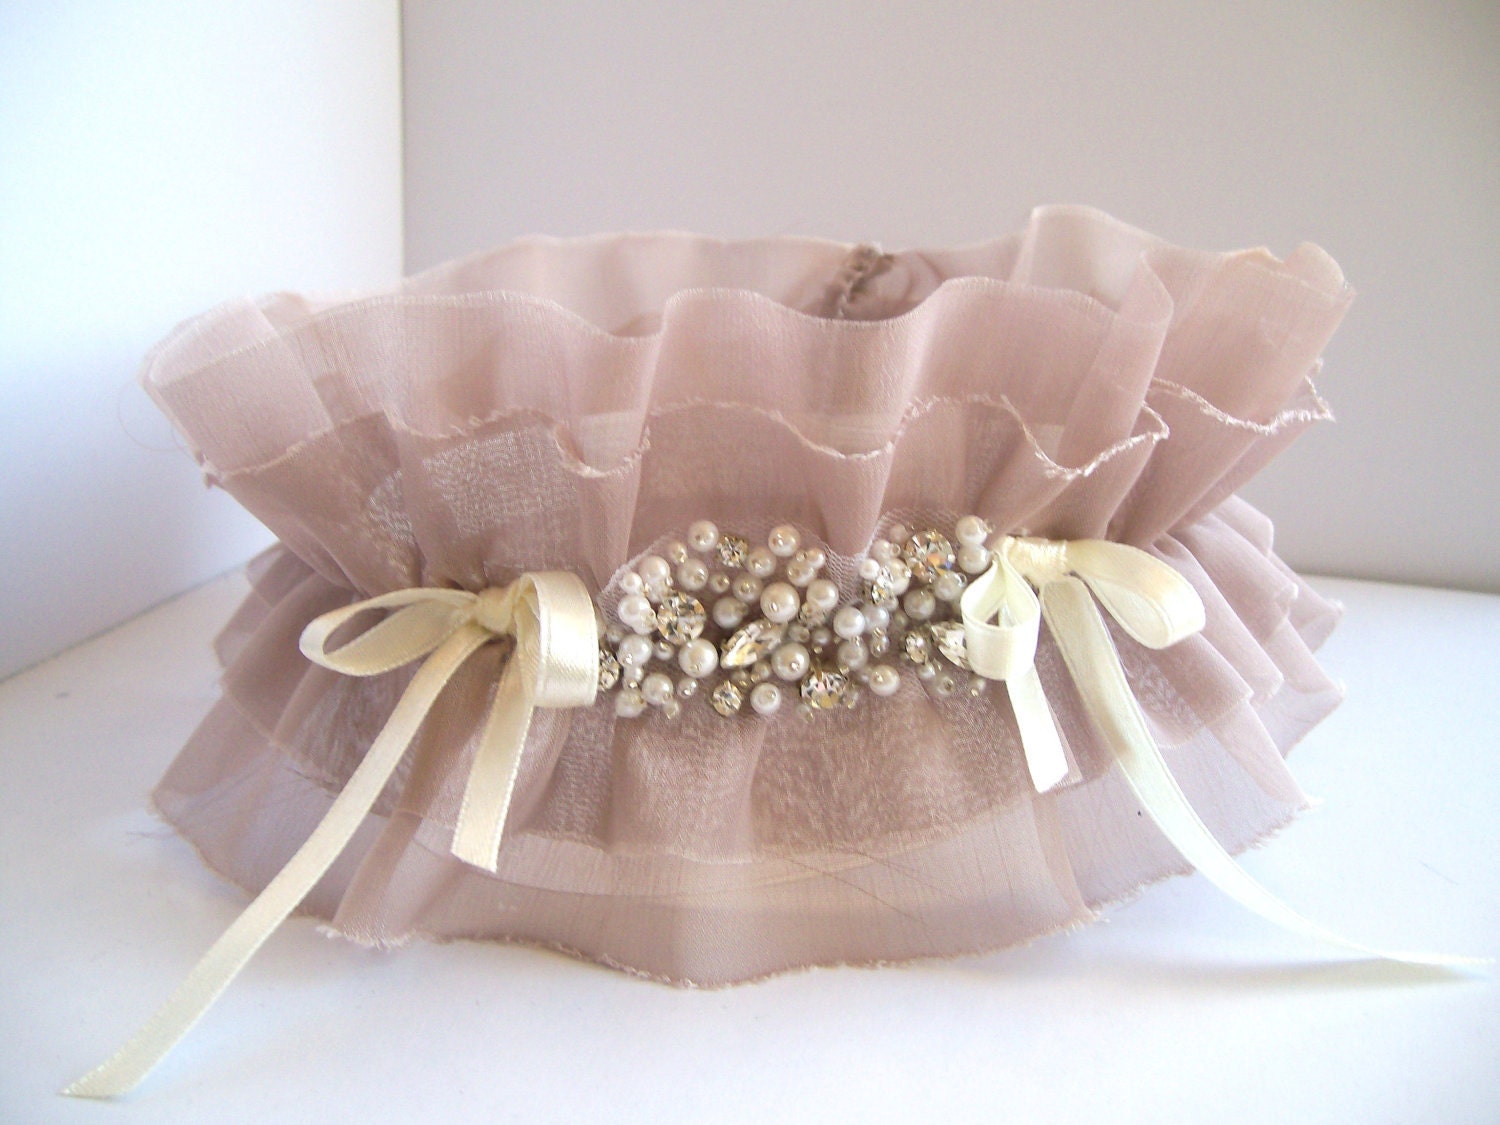 Champagne Chiffon Garter with Ivory Satin Bows and Crystals and Pearls centerpiece SET